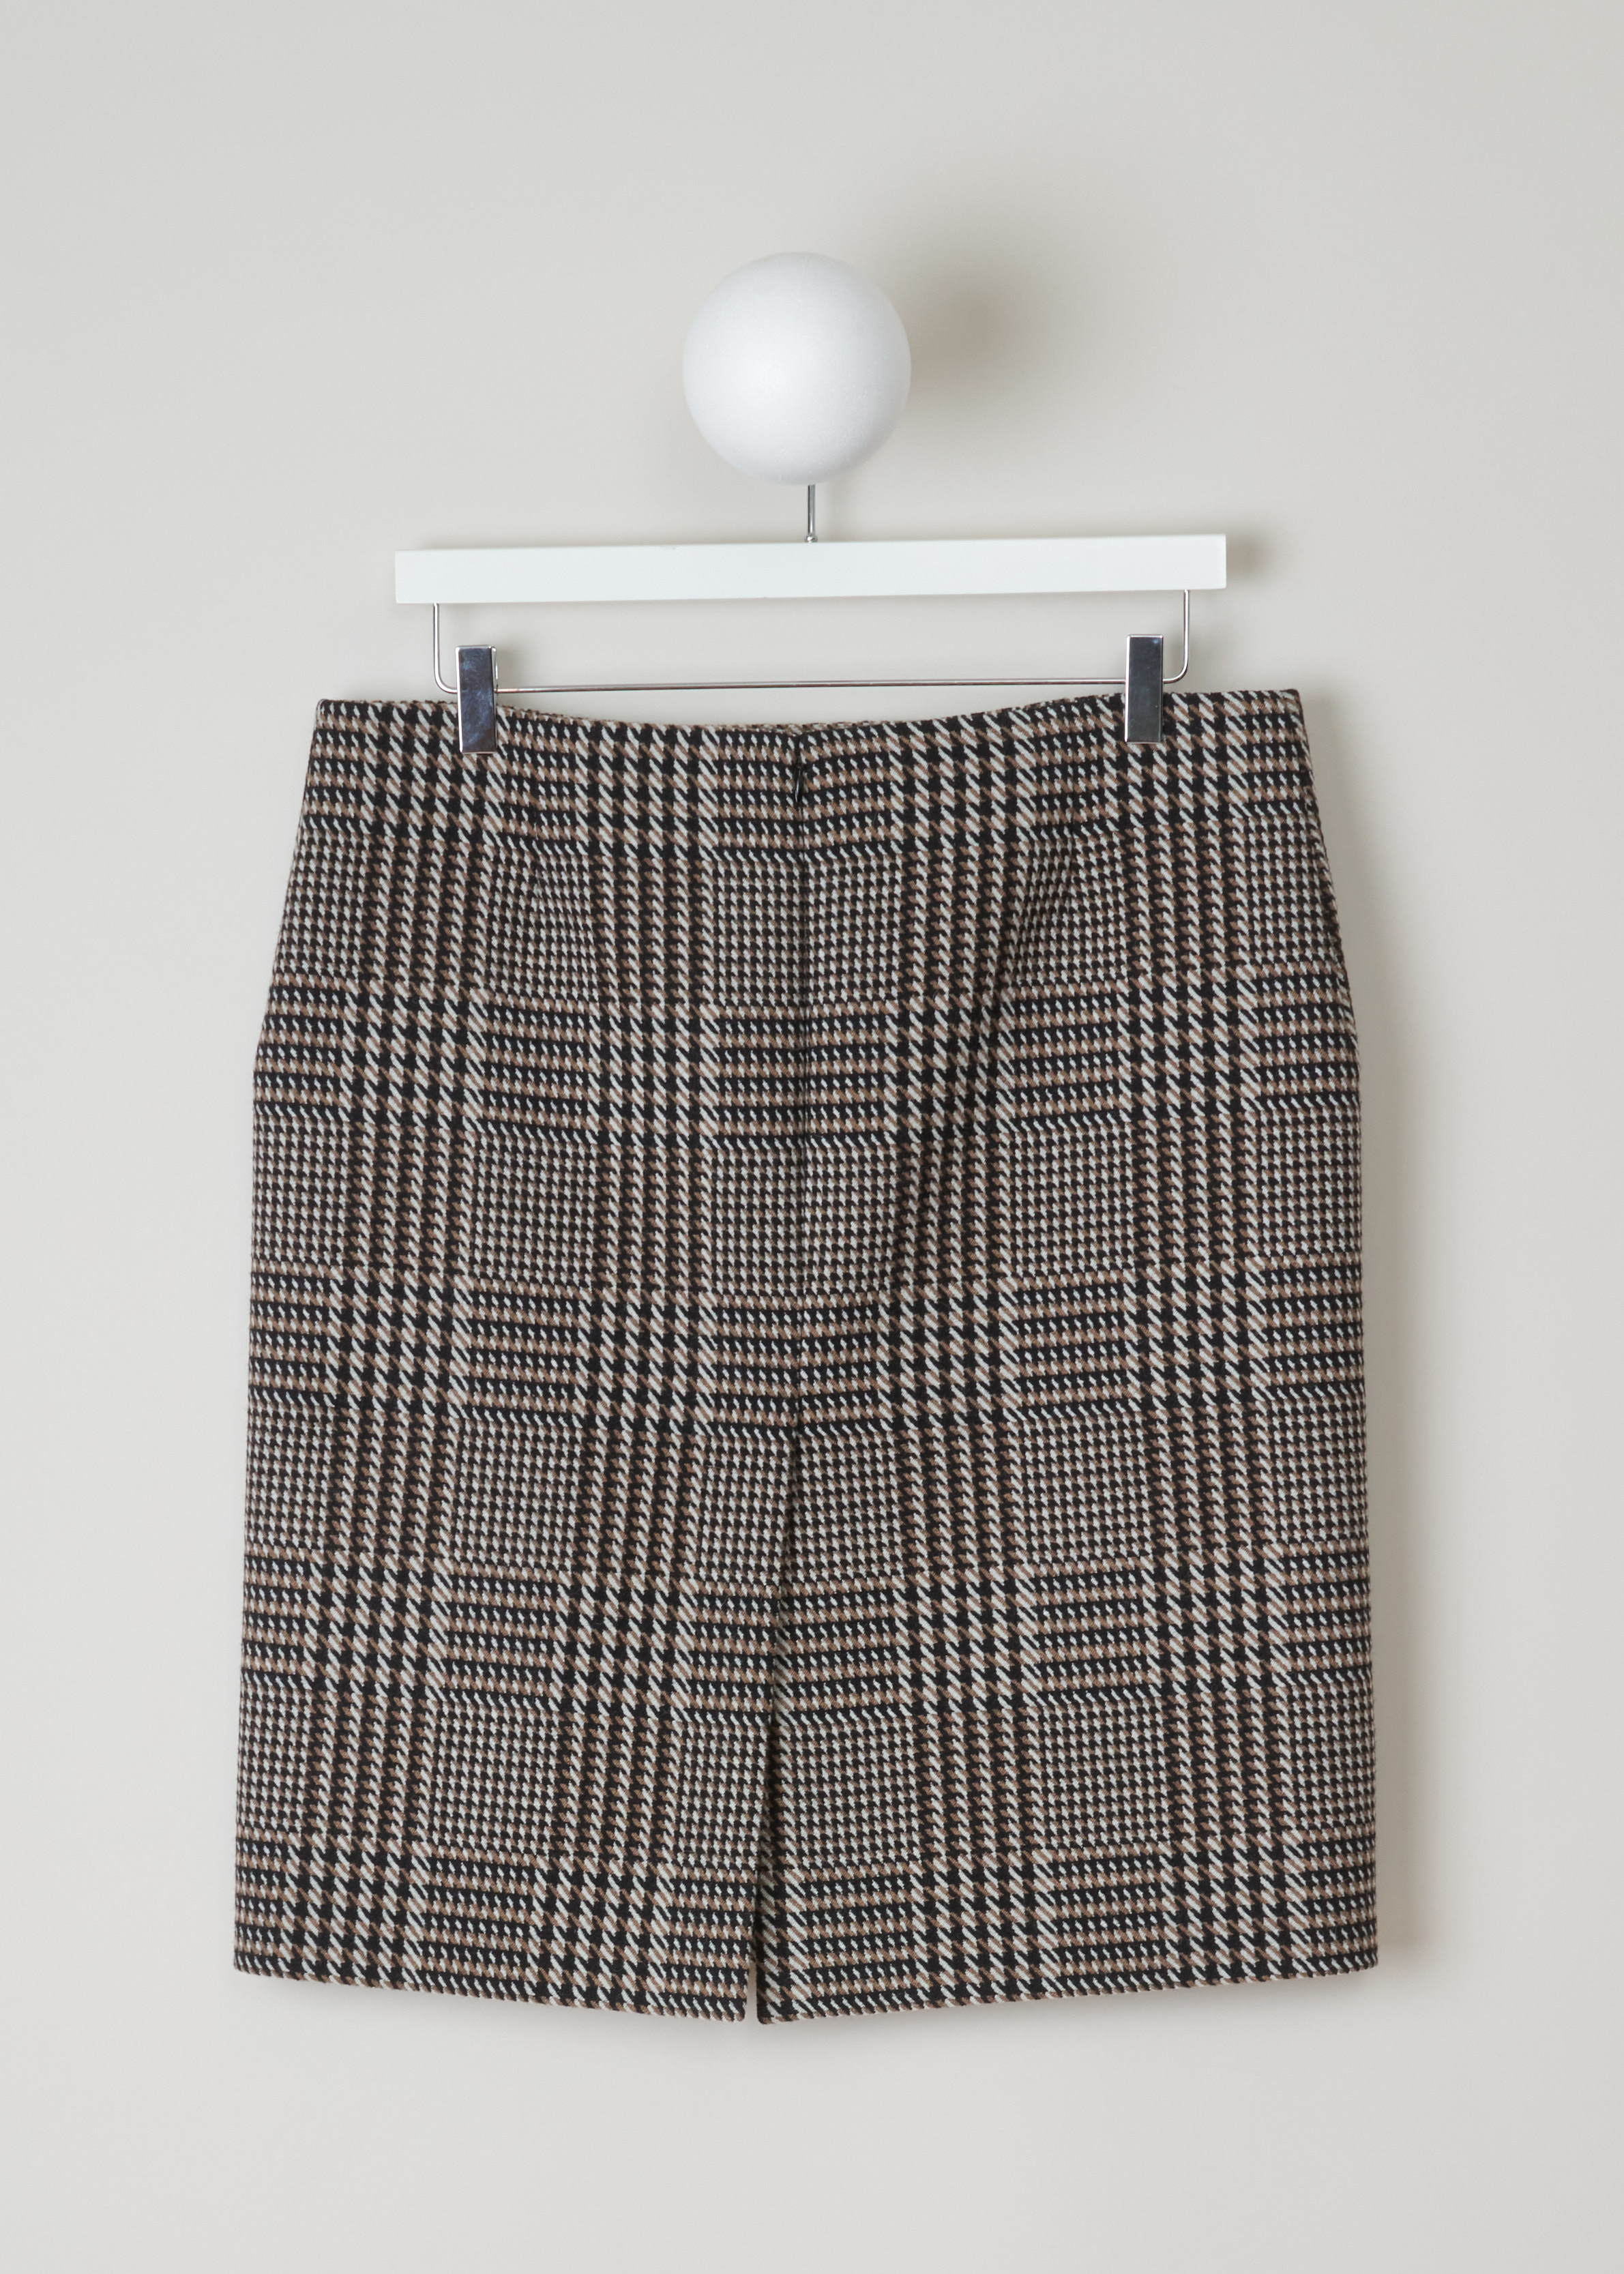 Balenciaga Tweed pencil skirt 528505_TBU21_2684 brown black back. Pencil skirt in brown, black and white tweed with a tailored fit, Balenciaga logo printed on the front, centre back split and an invisible zipper fastening at the back.